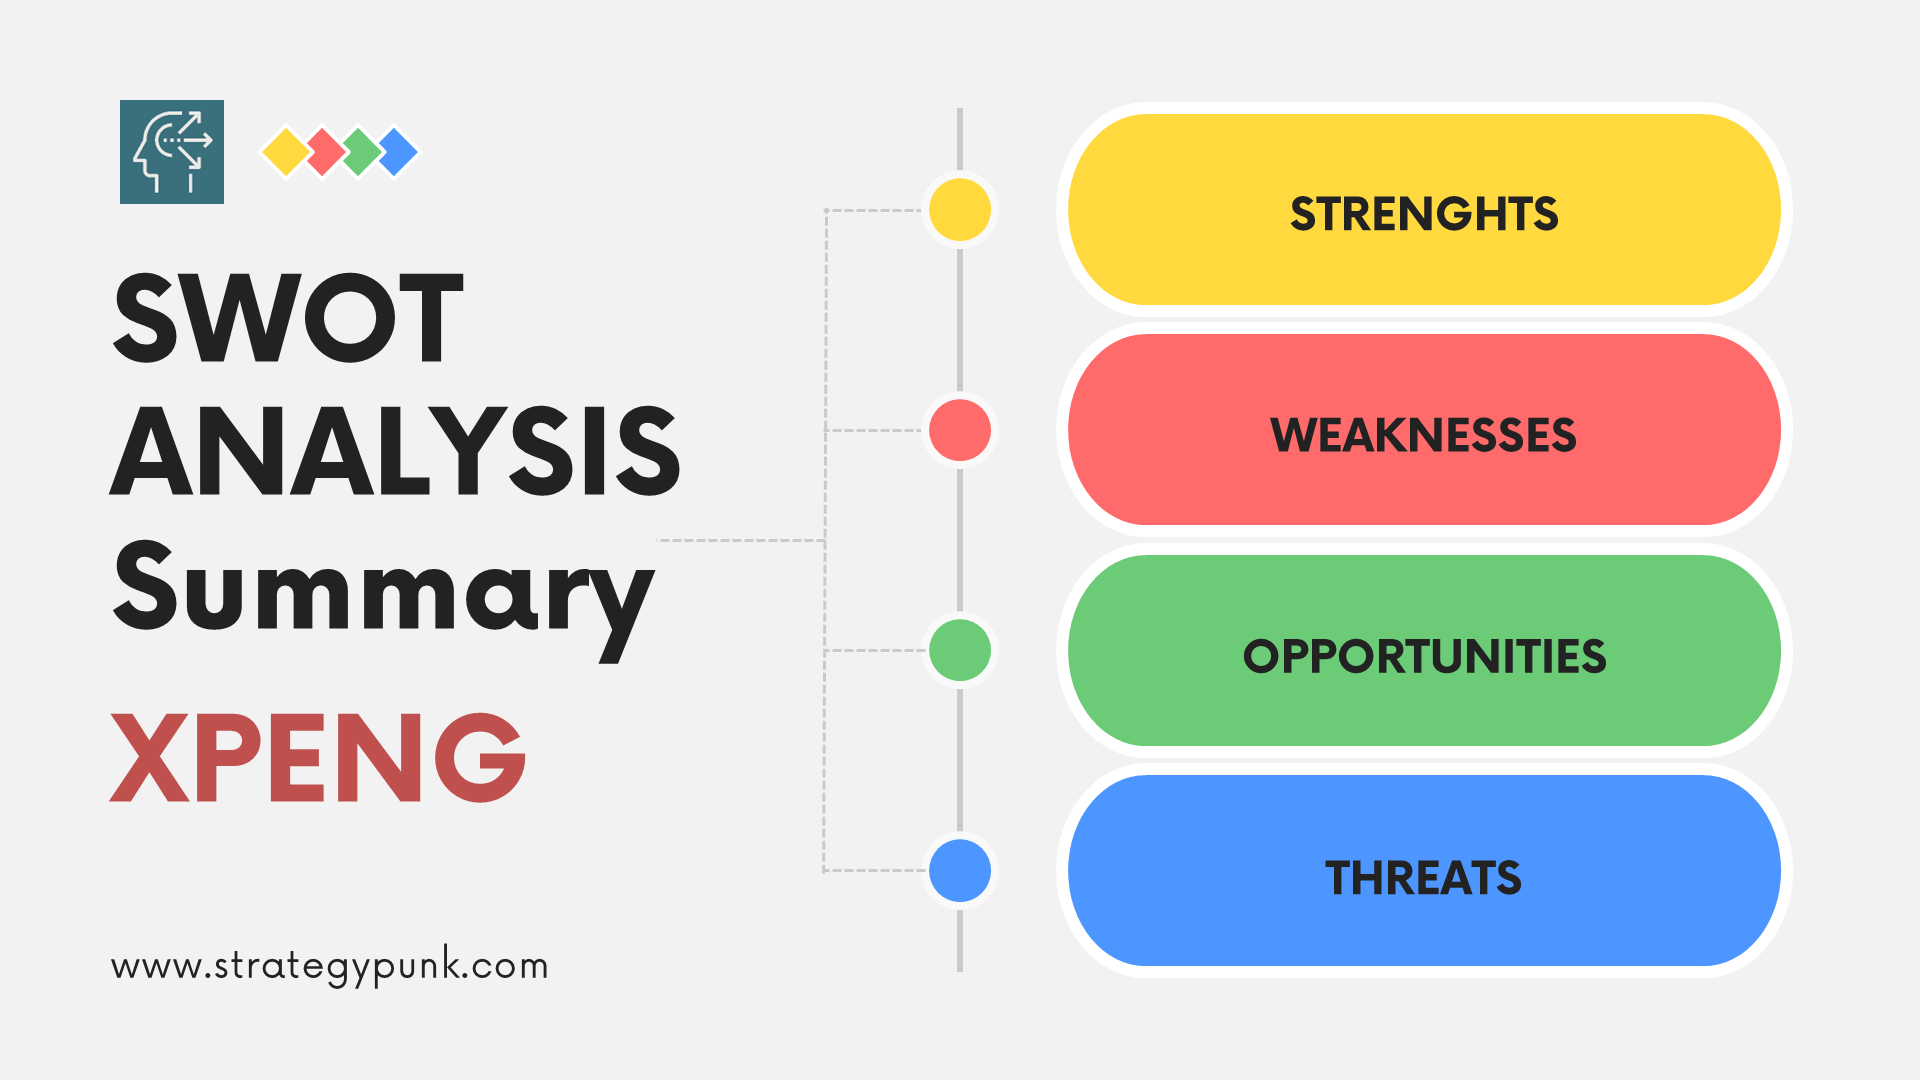 Xpeng SWOT Analysis: Free PPT Template and In-Depth Insights (free file)